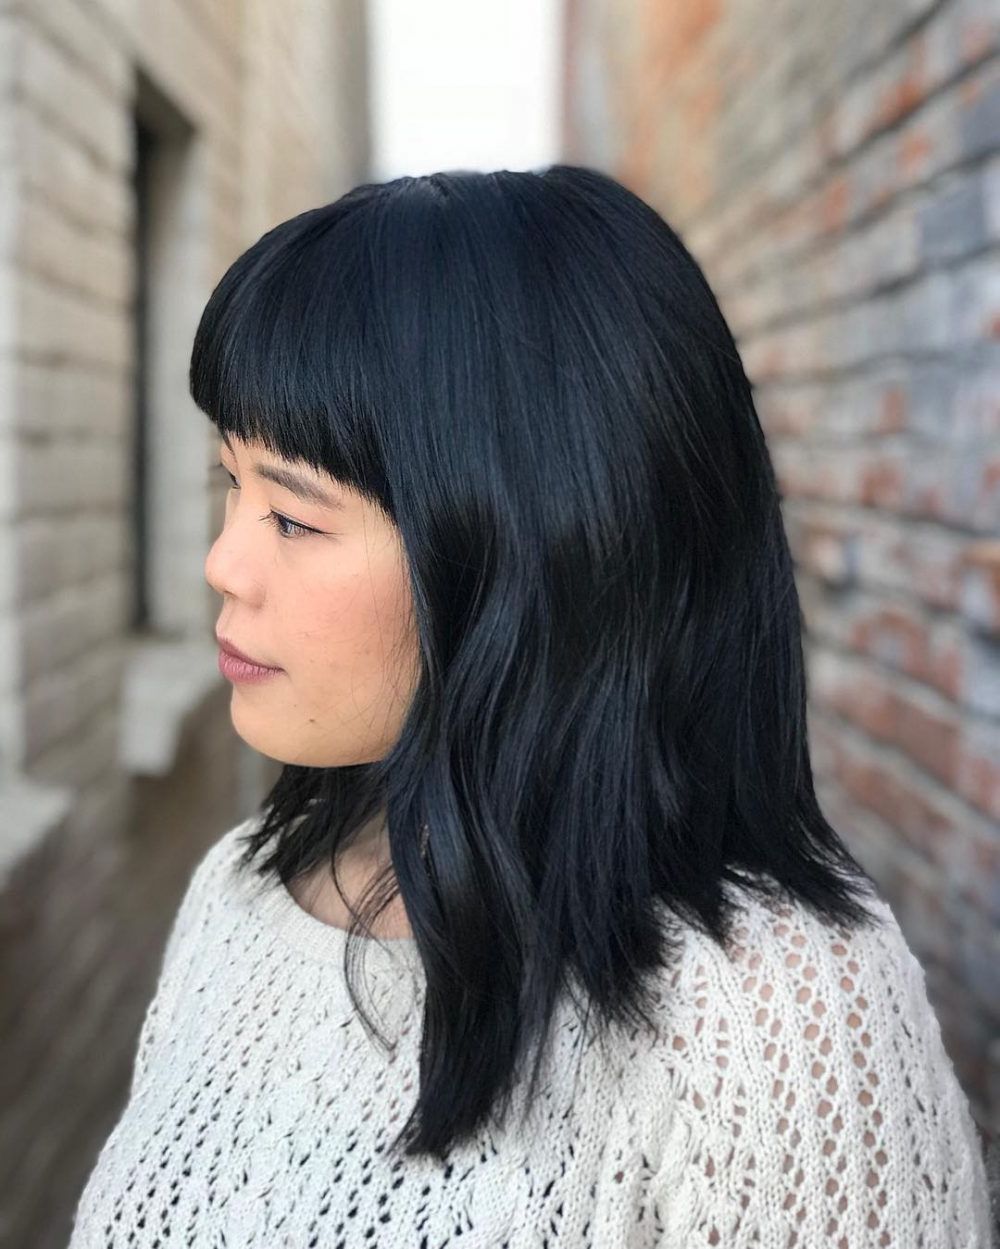 2018 Black Medium Hairstyles With Bangs And Layers Regarding 53 Popular Medium Length Hairstyles With Bangs In  (View 6 of 20)